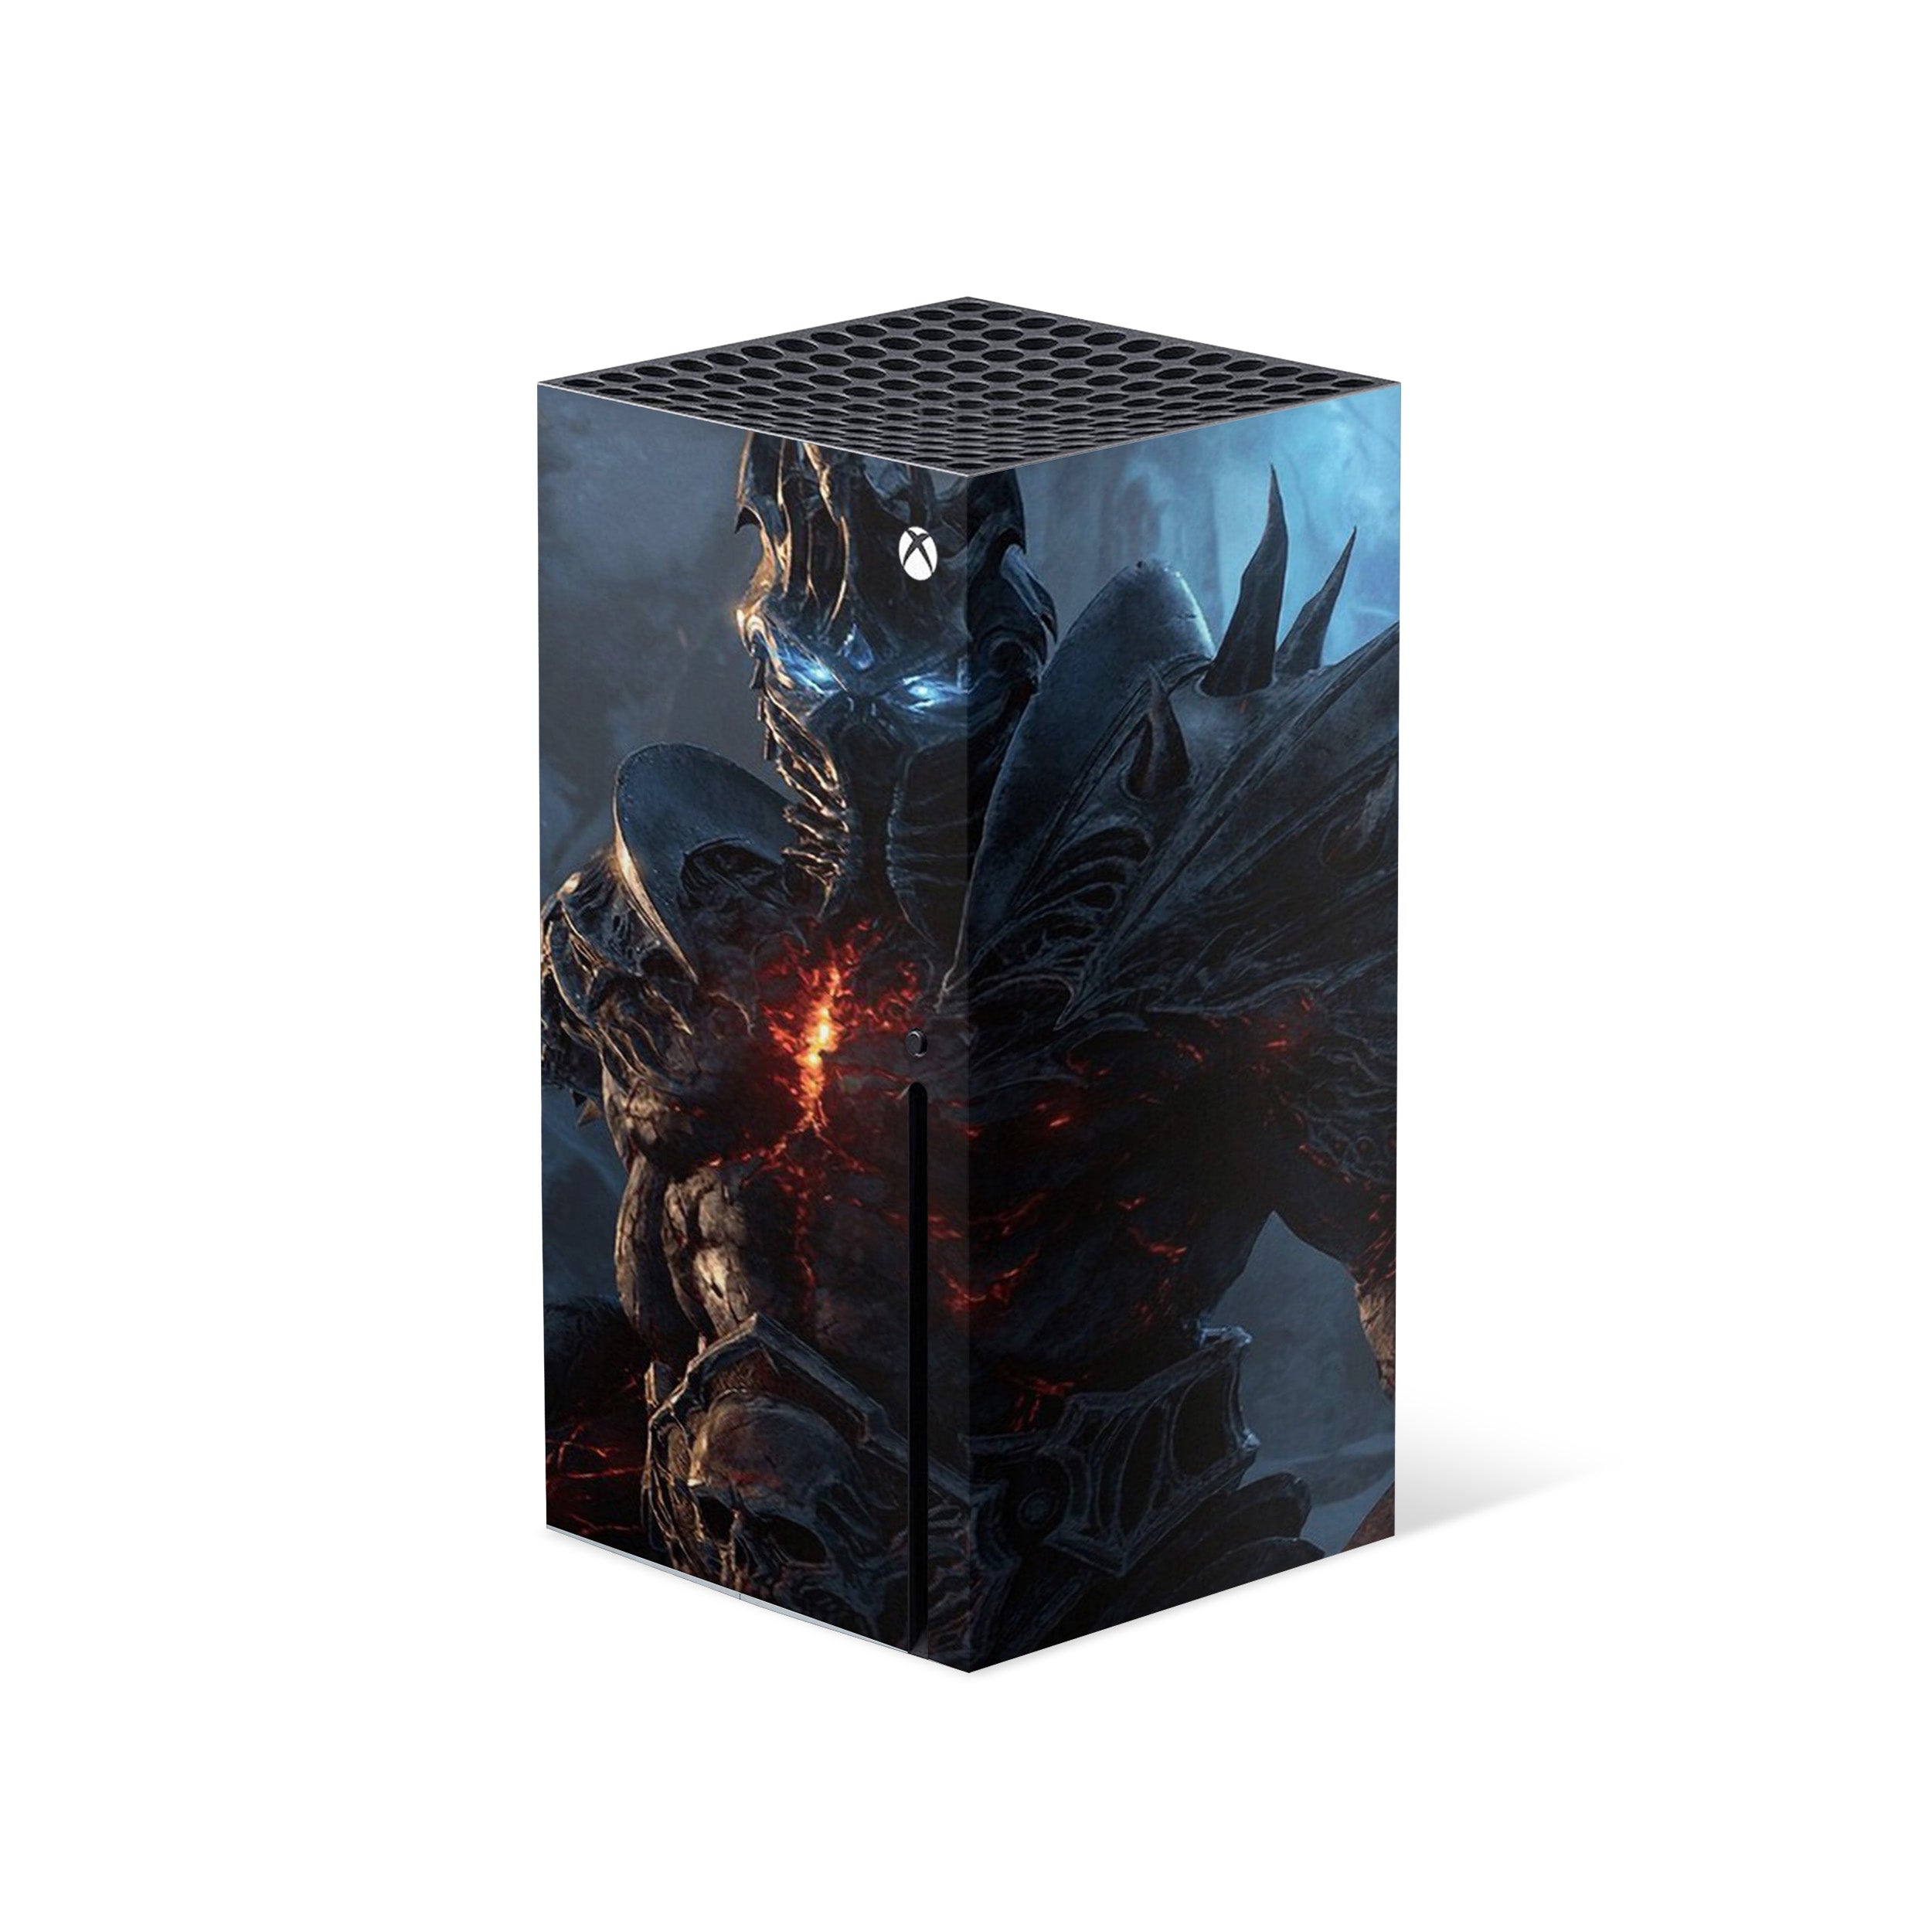 A video game skin featuring a World of Warcraft design for the Xbox Series X.